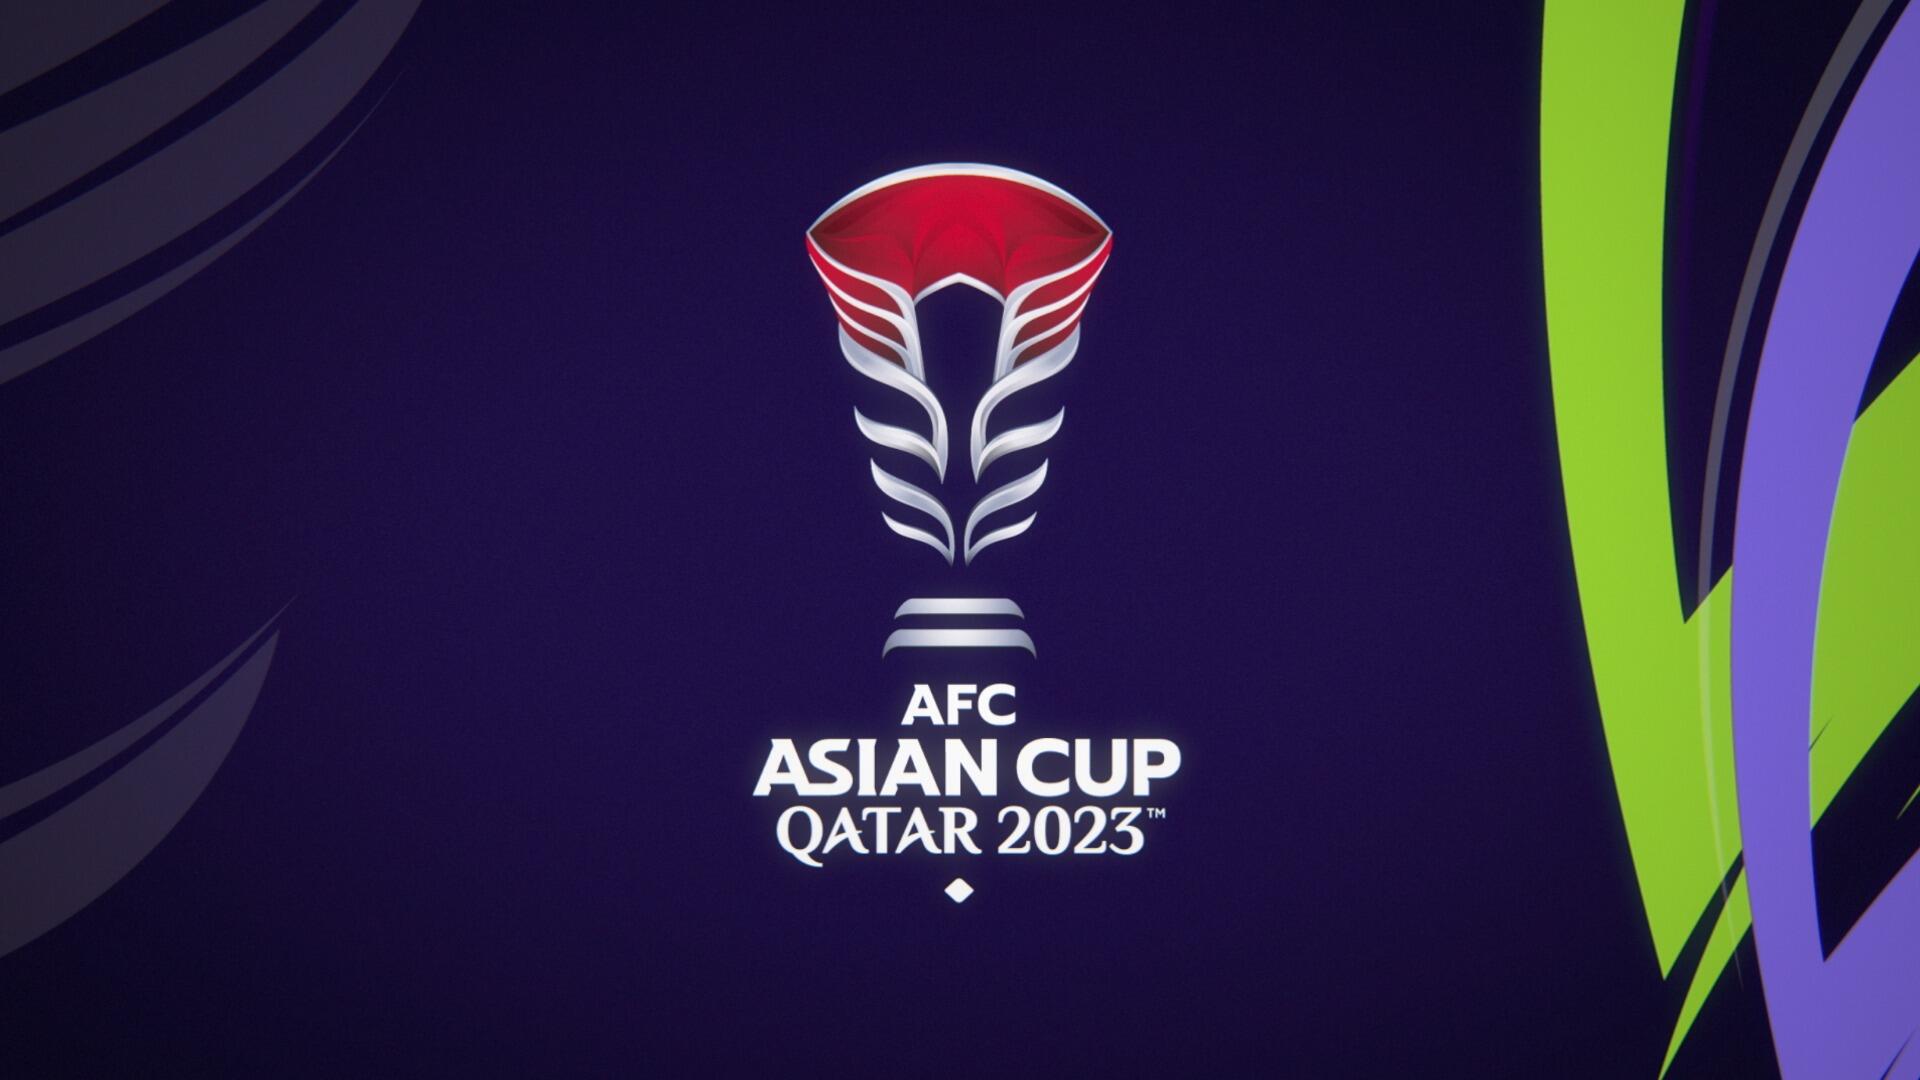 AFC] The AFC Champions League™ 2023/24 Group C match between